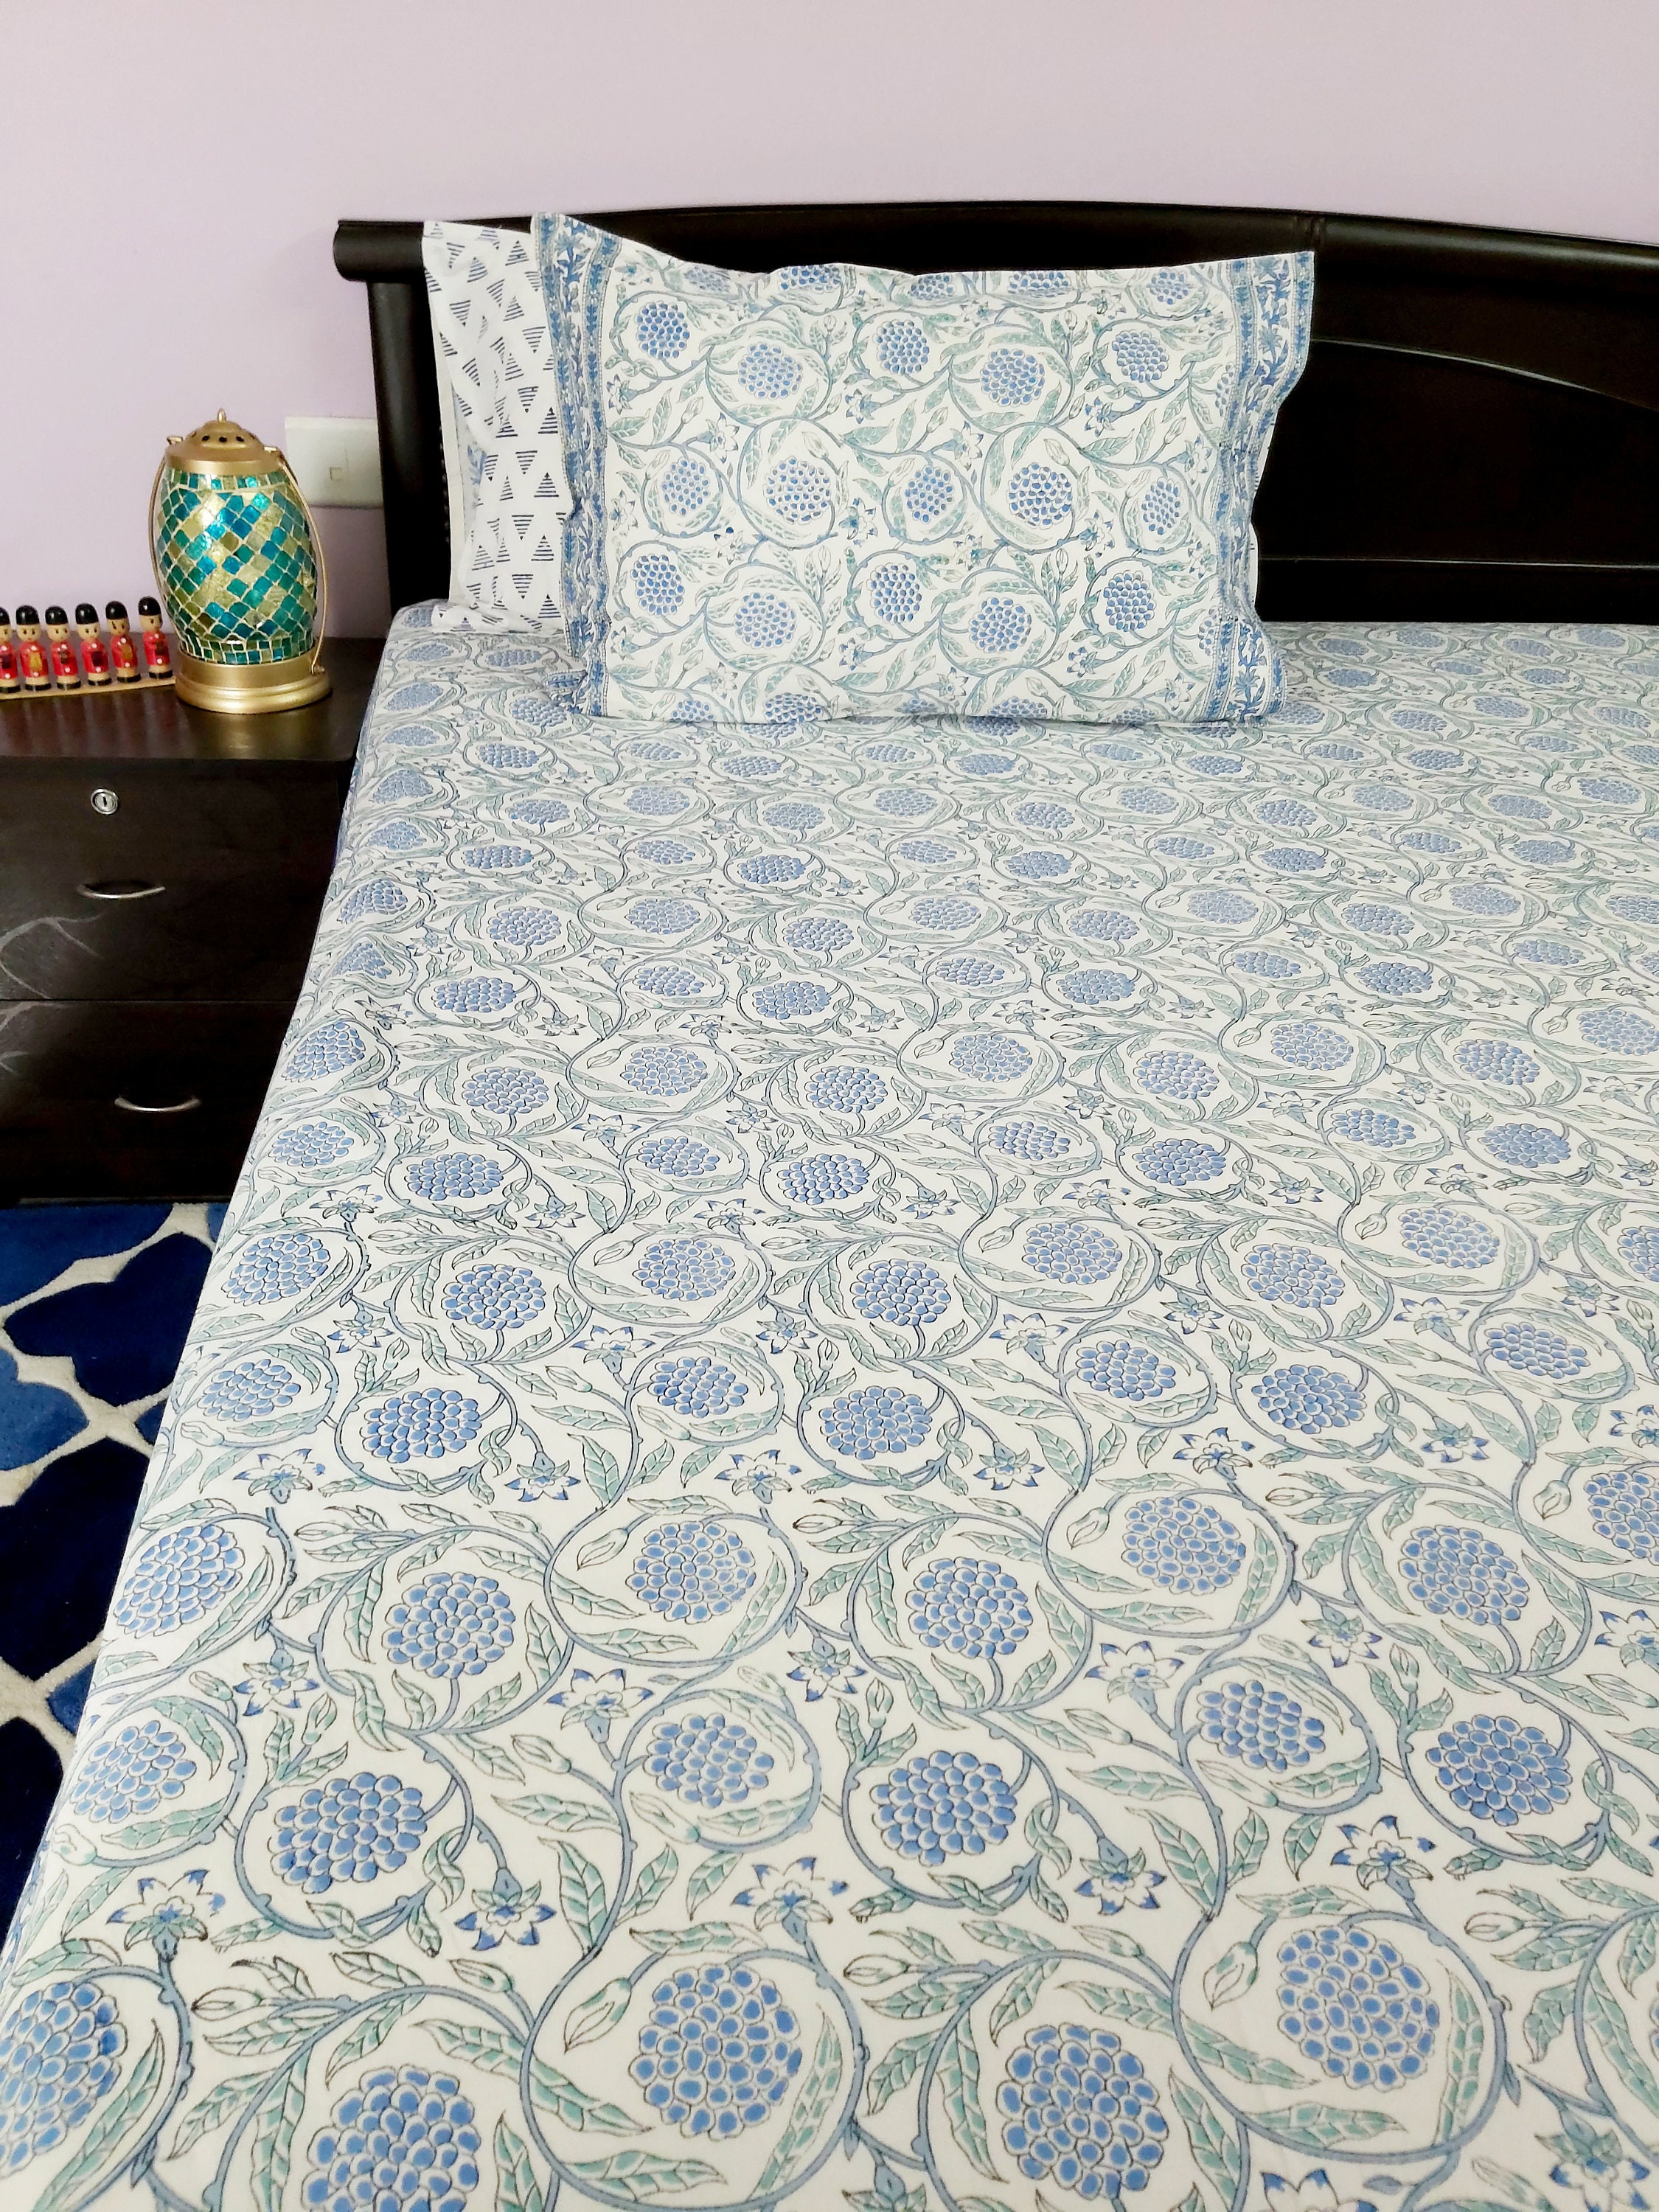 Indian Handmade Quilt With Gray And Navy Blue Color Hand Block Print,Bedspreads Jaipuri Quilt Beautiful Animal Design Cotton Based Quilt